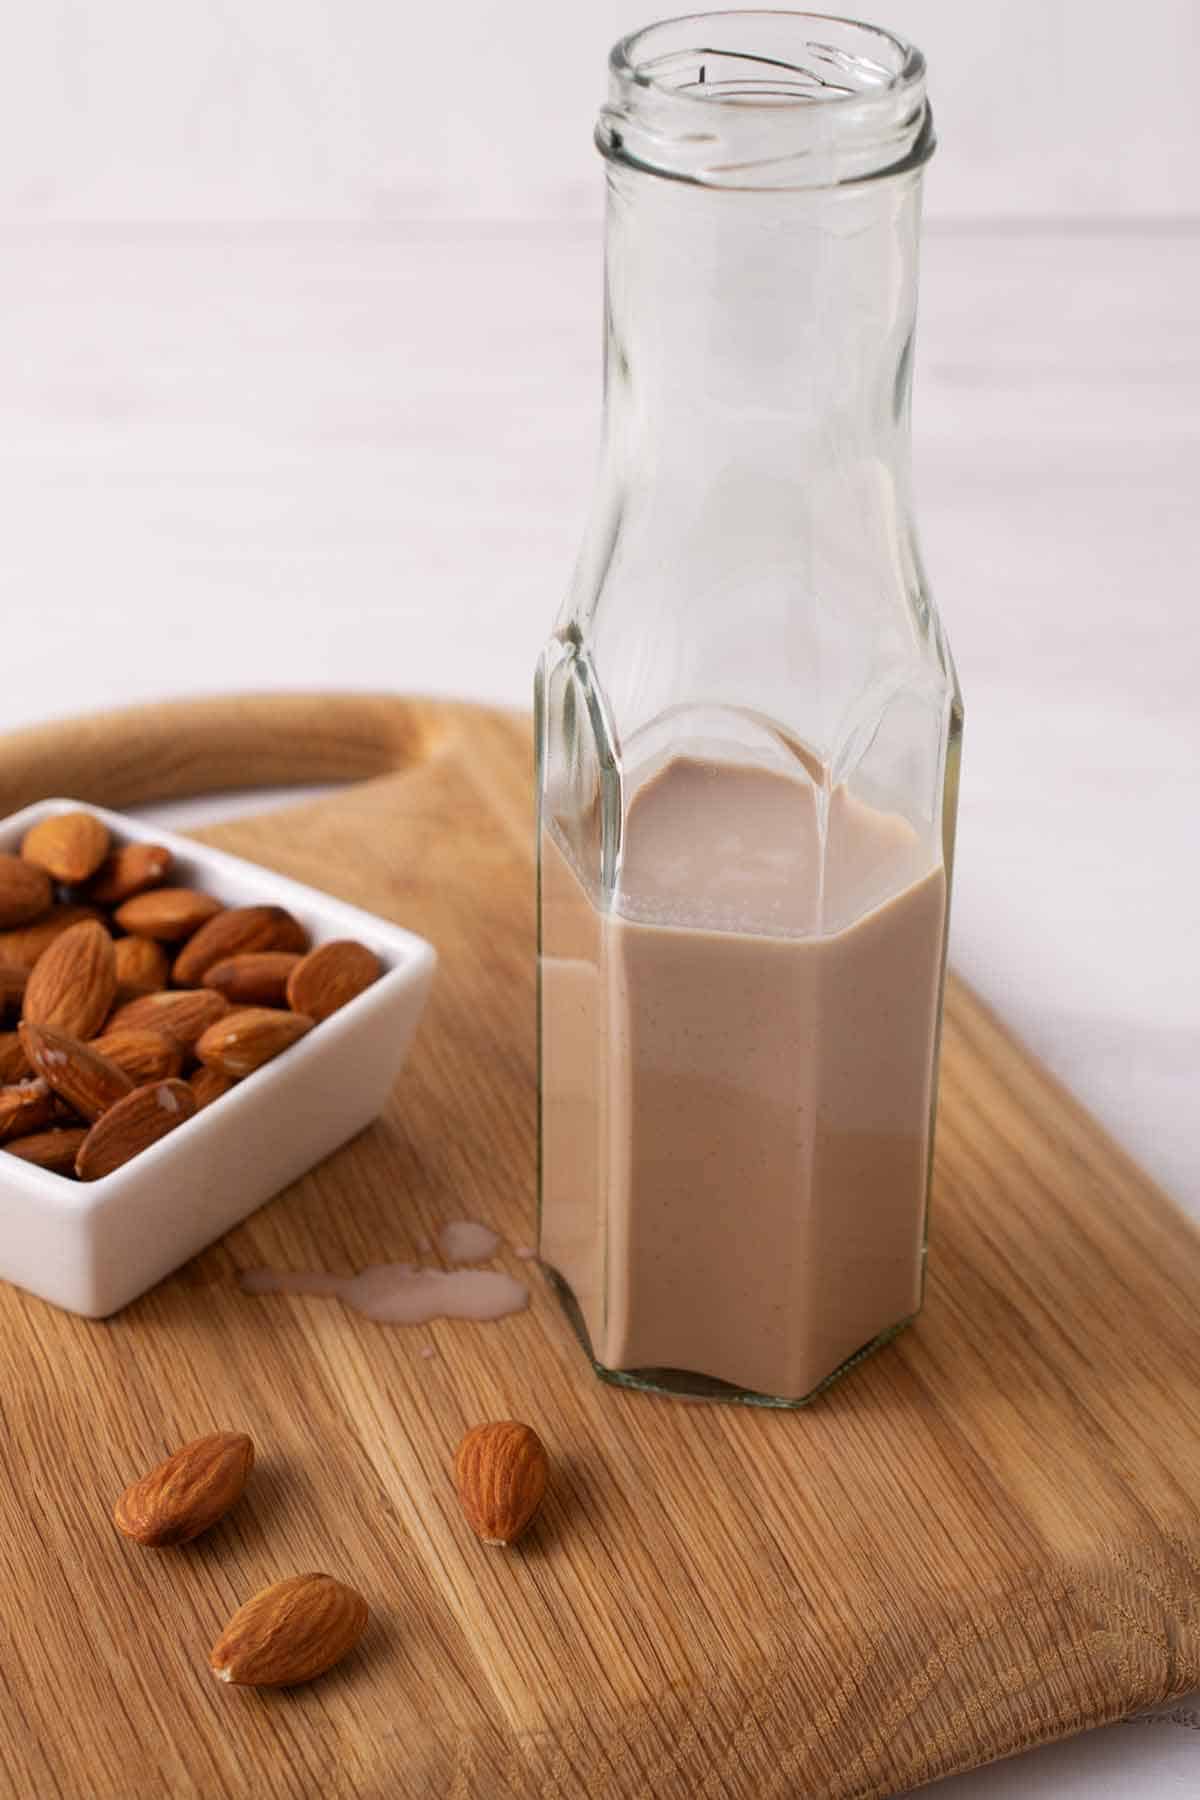 Tall glass container with chocolate almond milk next to a small bowl of raw almonds.